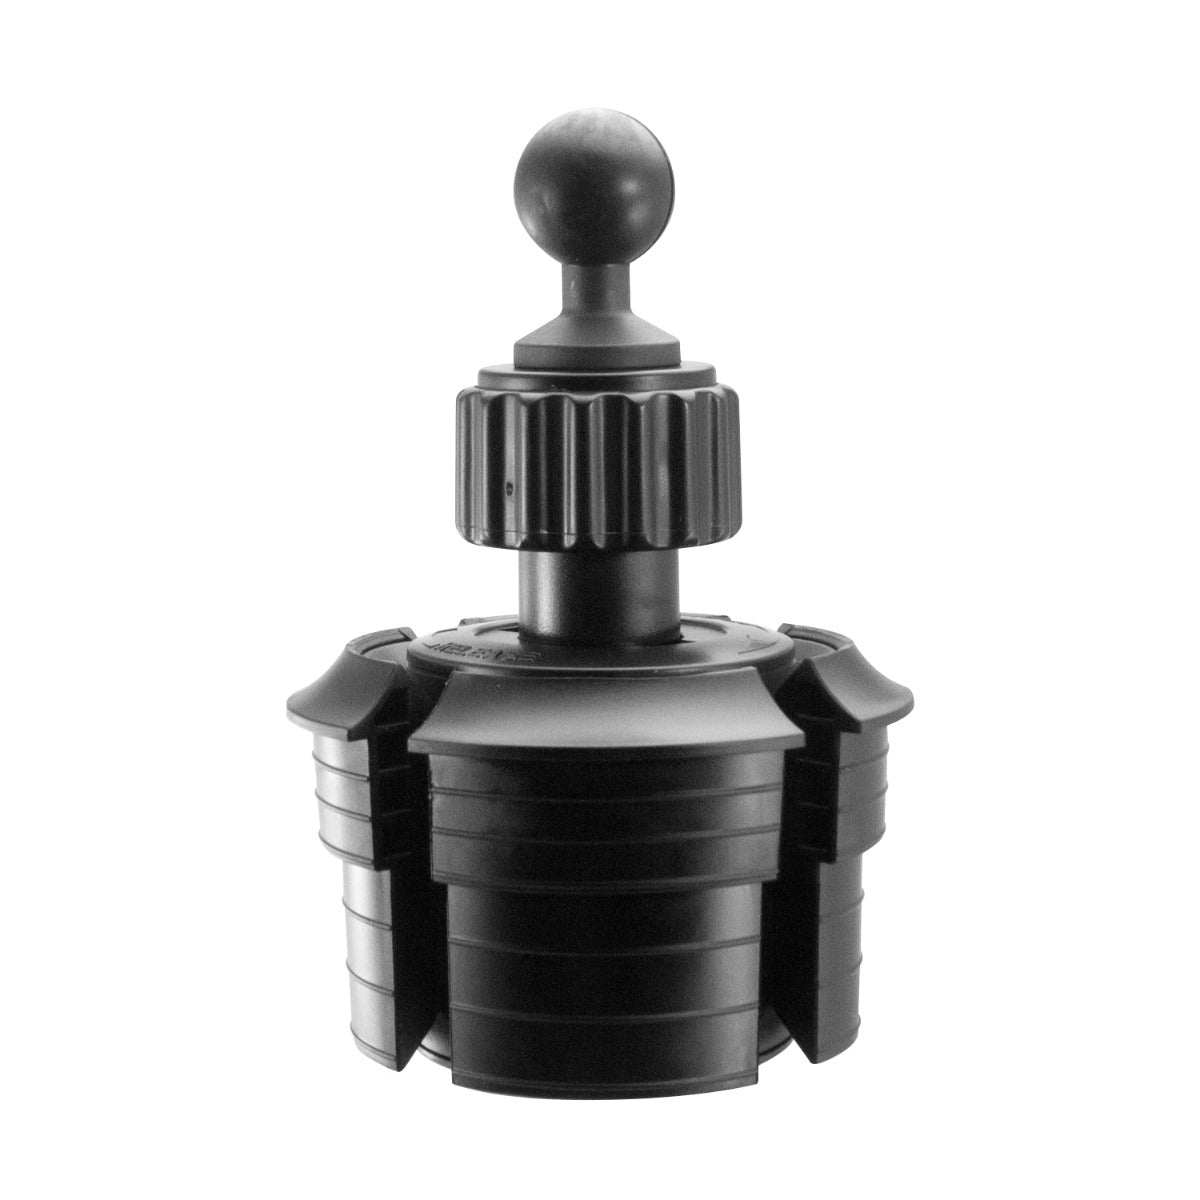 iBOLT 17mm Dual Ball to Cup Holder Mount Base compatible w/ Garmin GPS and iBOLT Phone Holders